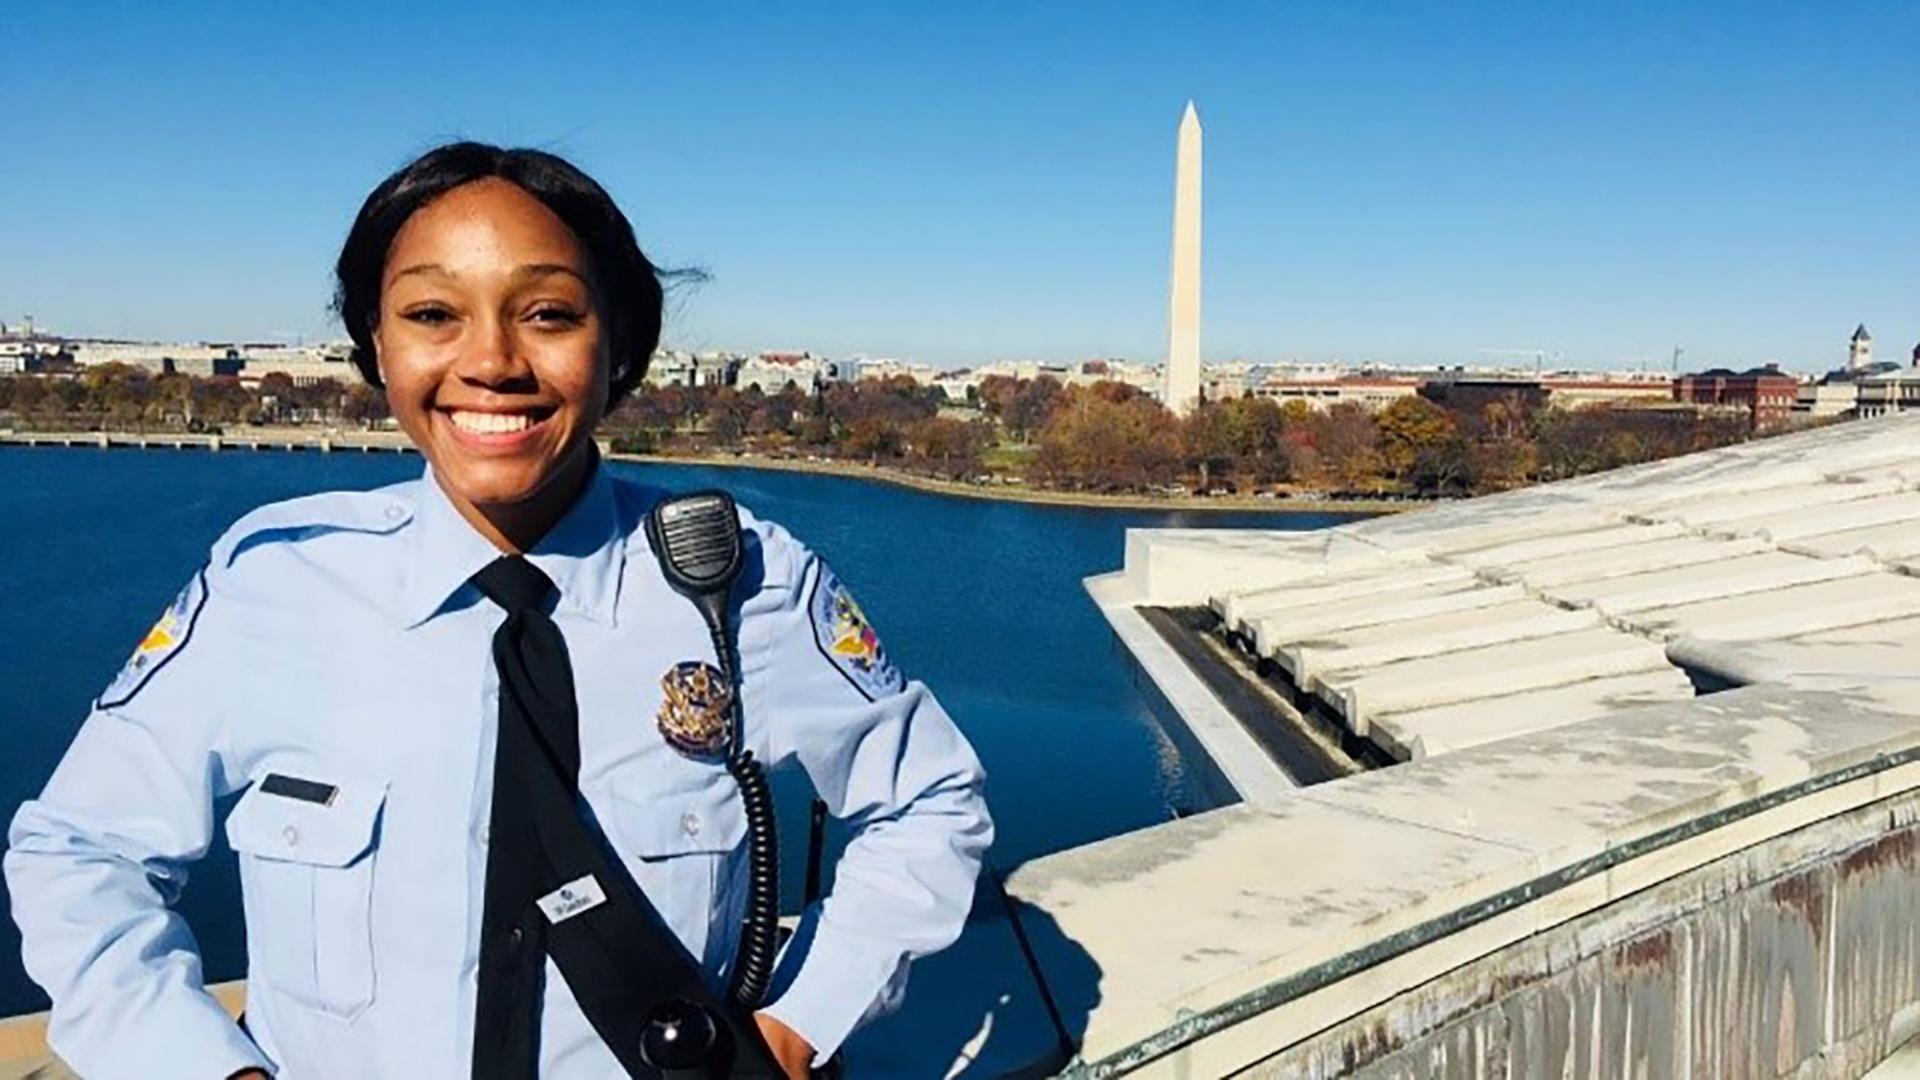 Woman in LE uniform poses in front of National Monument